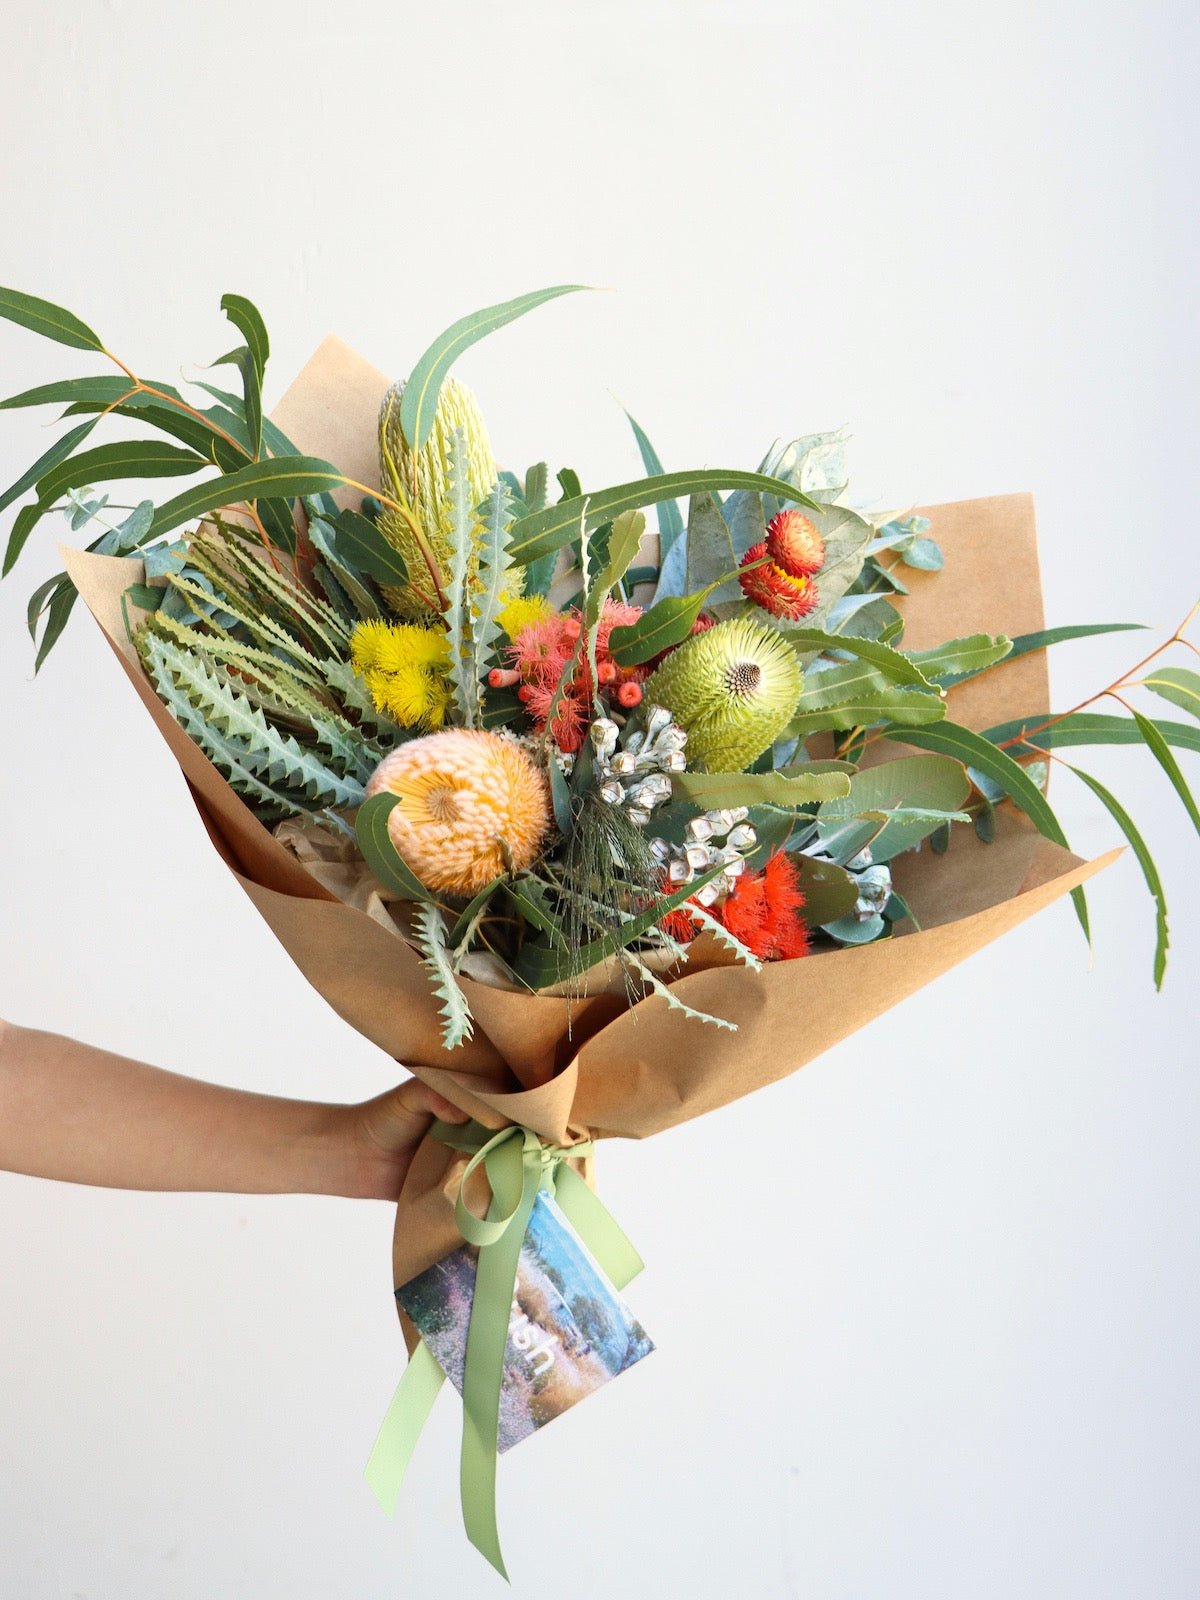 A small size bouquet of australian native flowers. The bouquet features banksias, flowering gum, strawflower and eucalyptus.